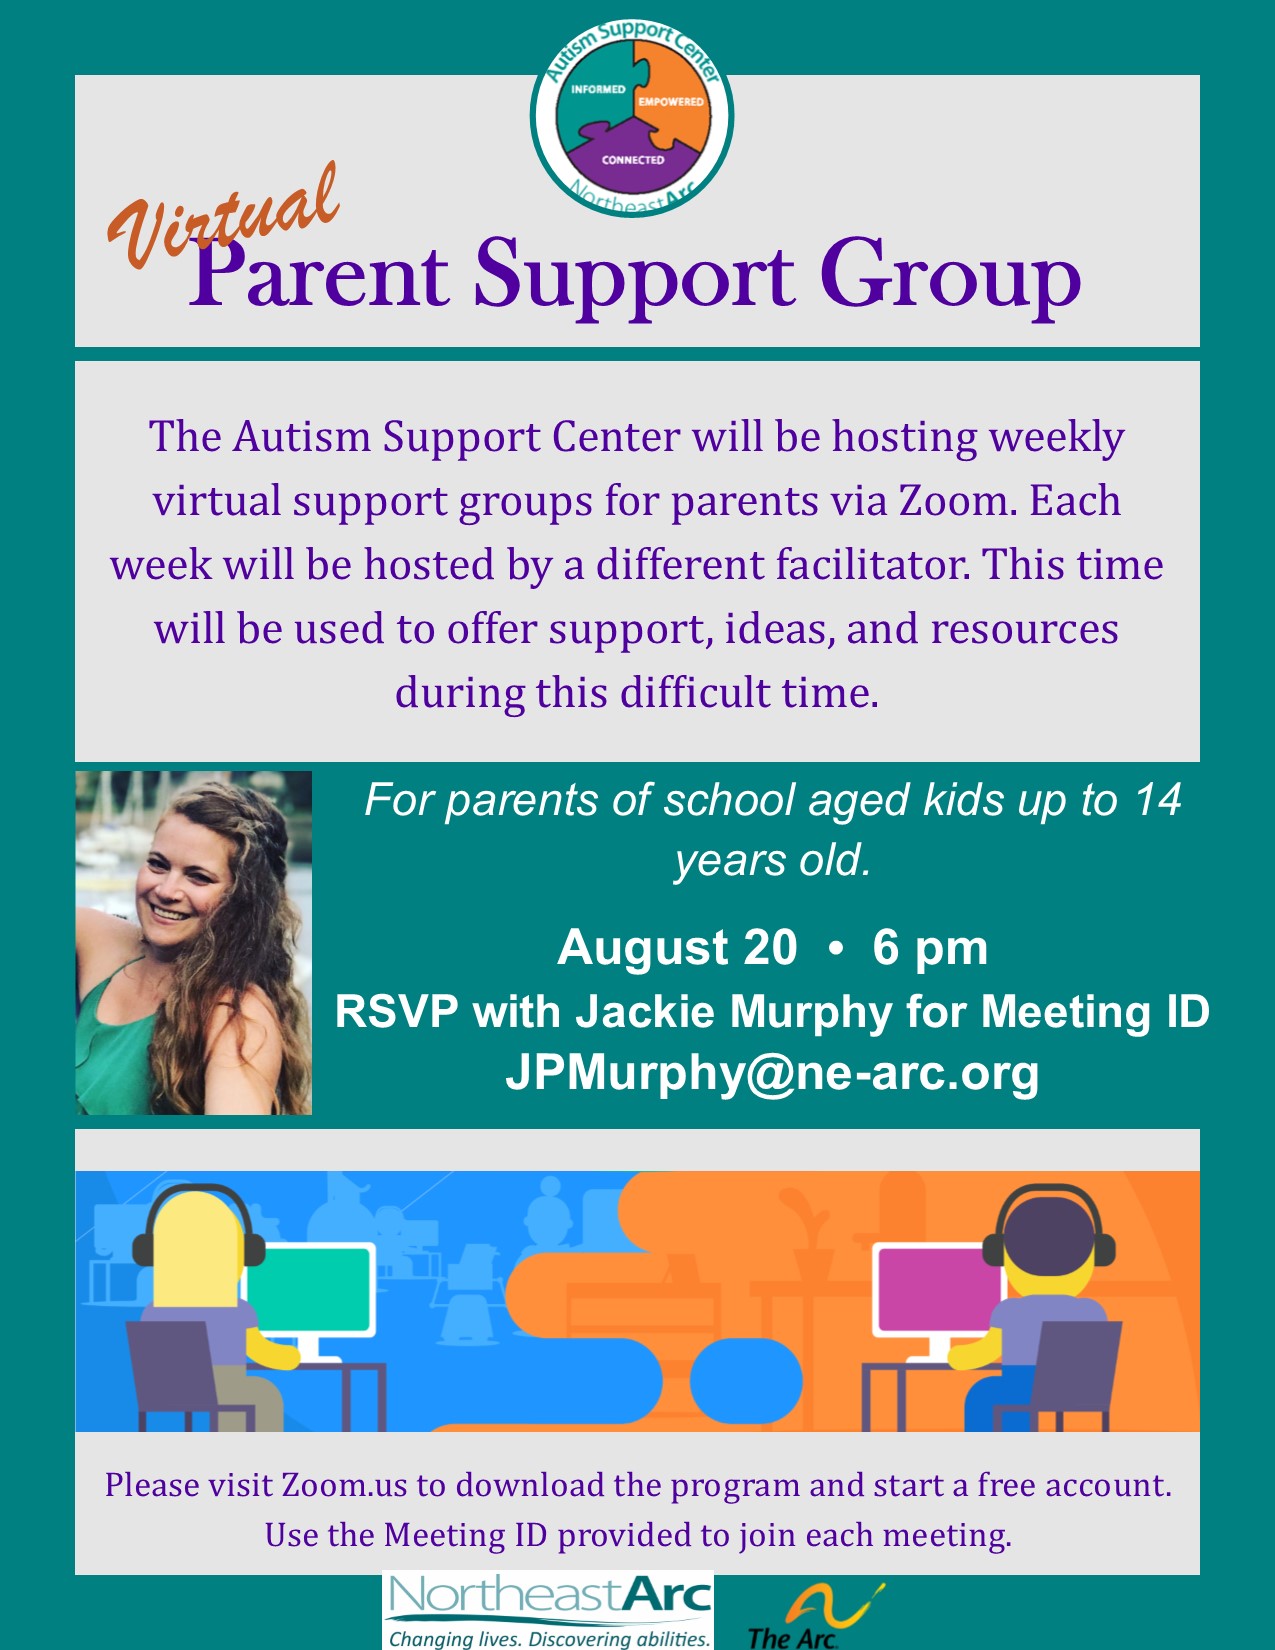 Flyer for ASC Virtual Parent Support Group meeting on August 20 at 6PM